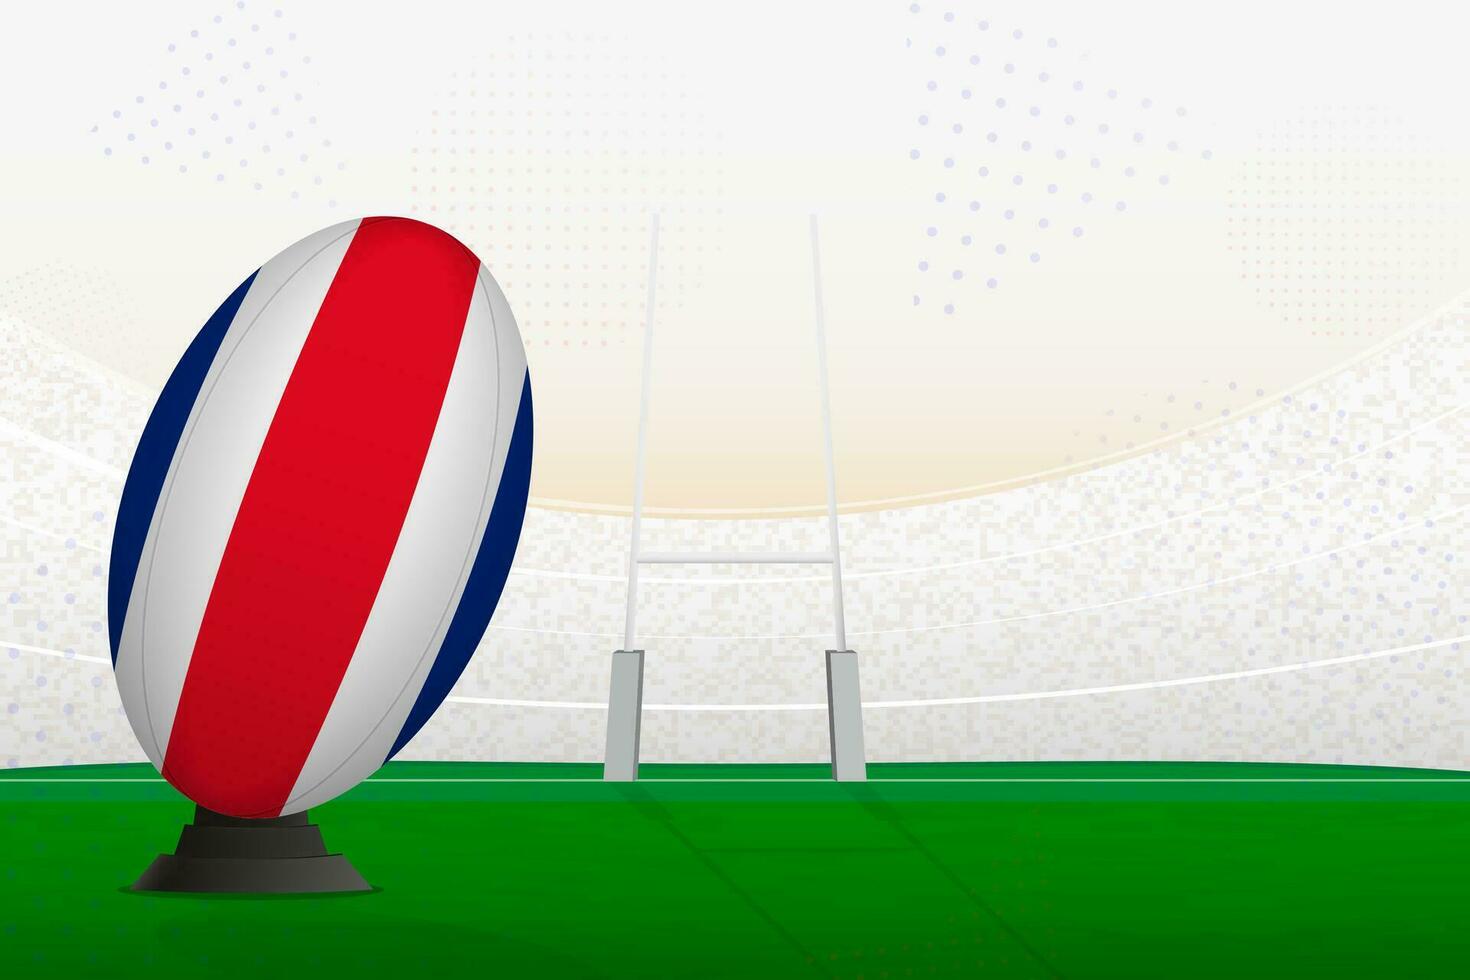 Costa Rica national team rugby ball on rugby stadium and goal posts, preparing for a penalty or free kick. vector